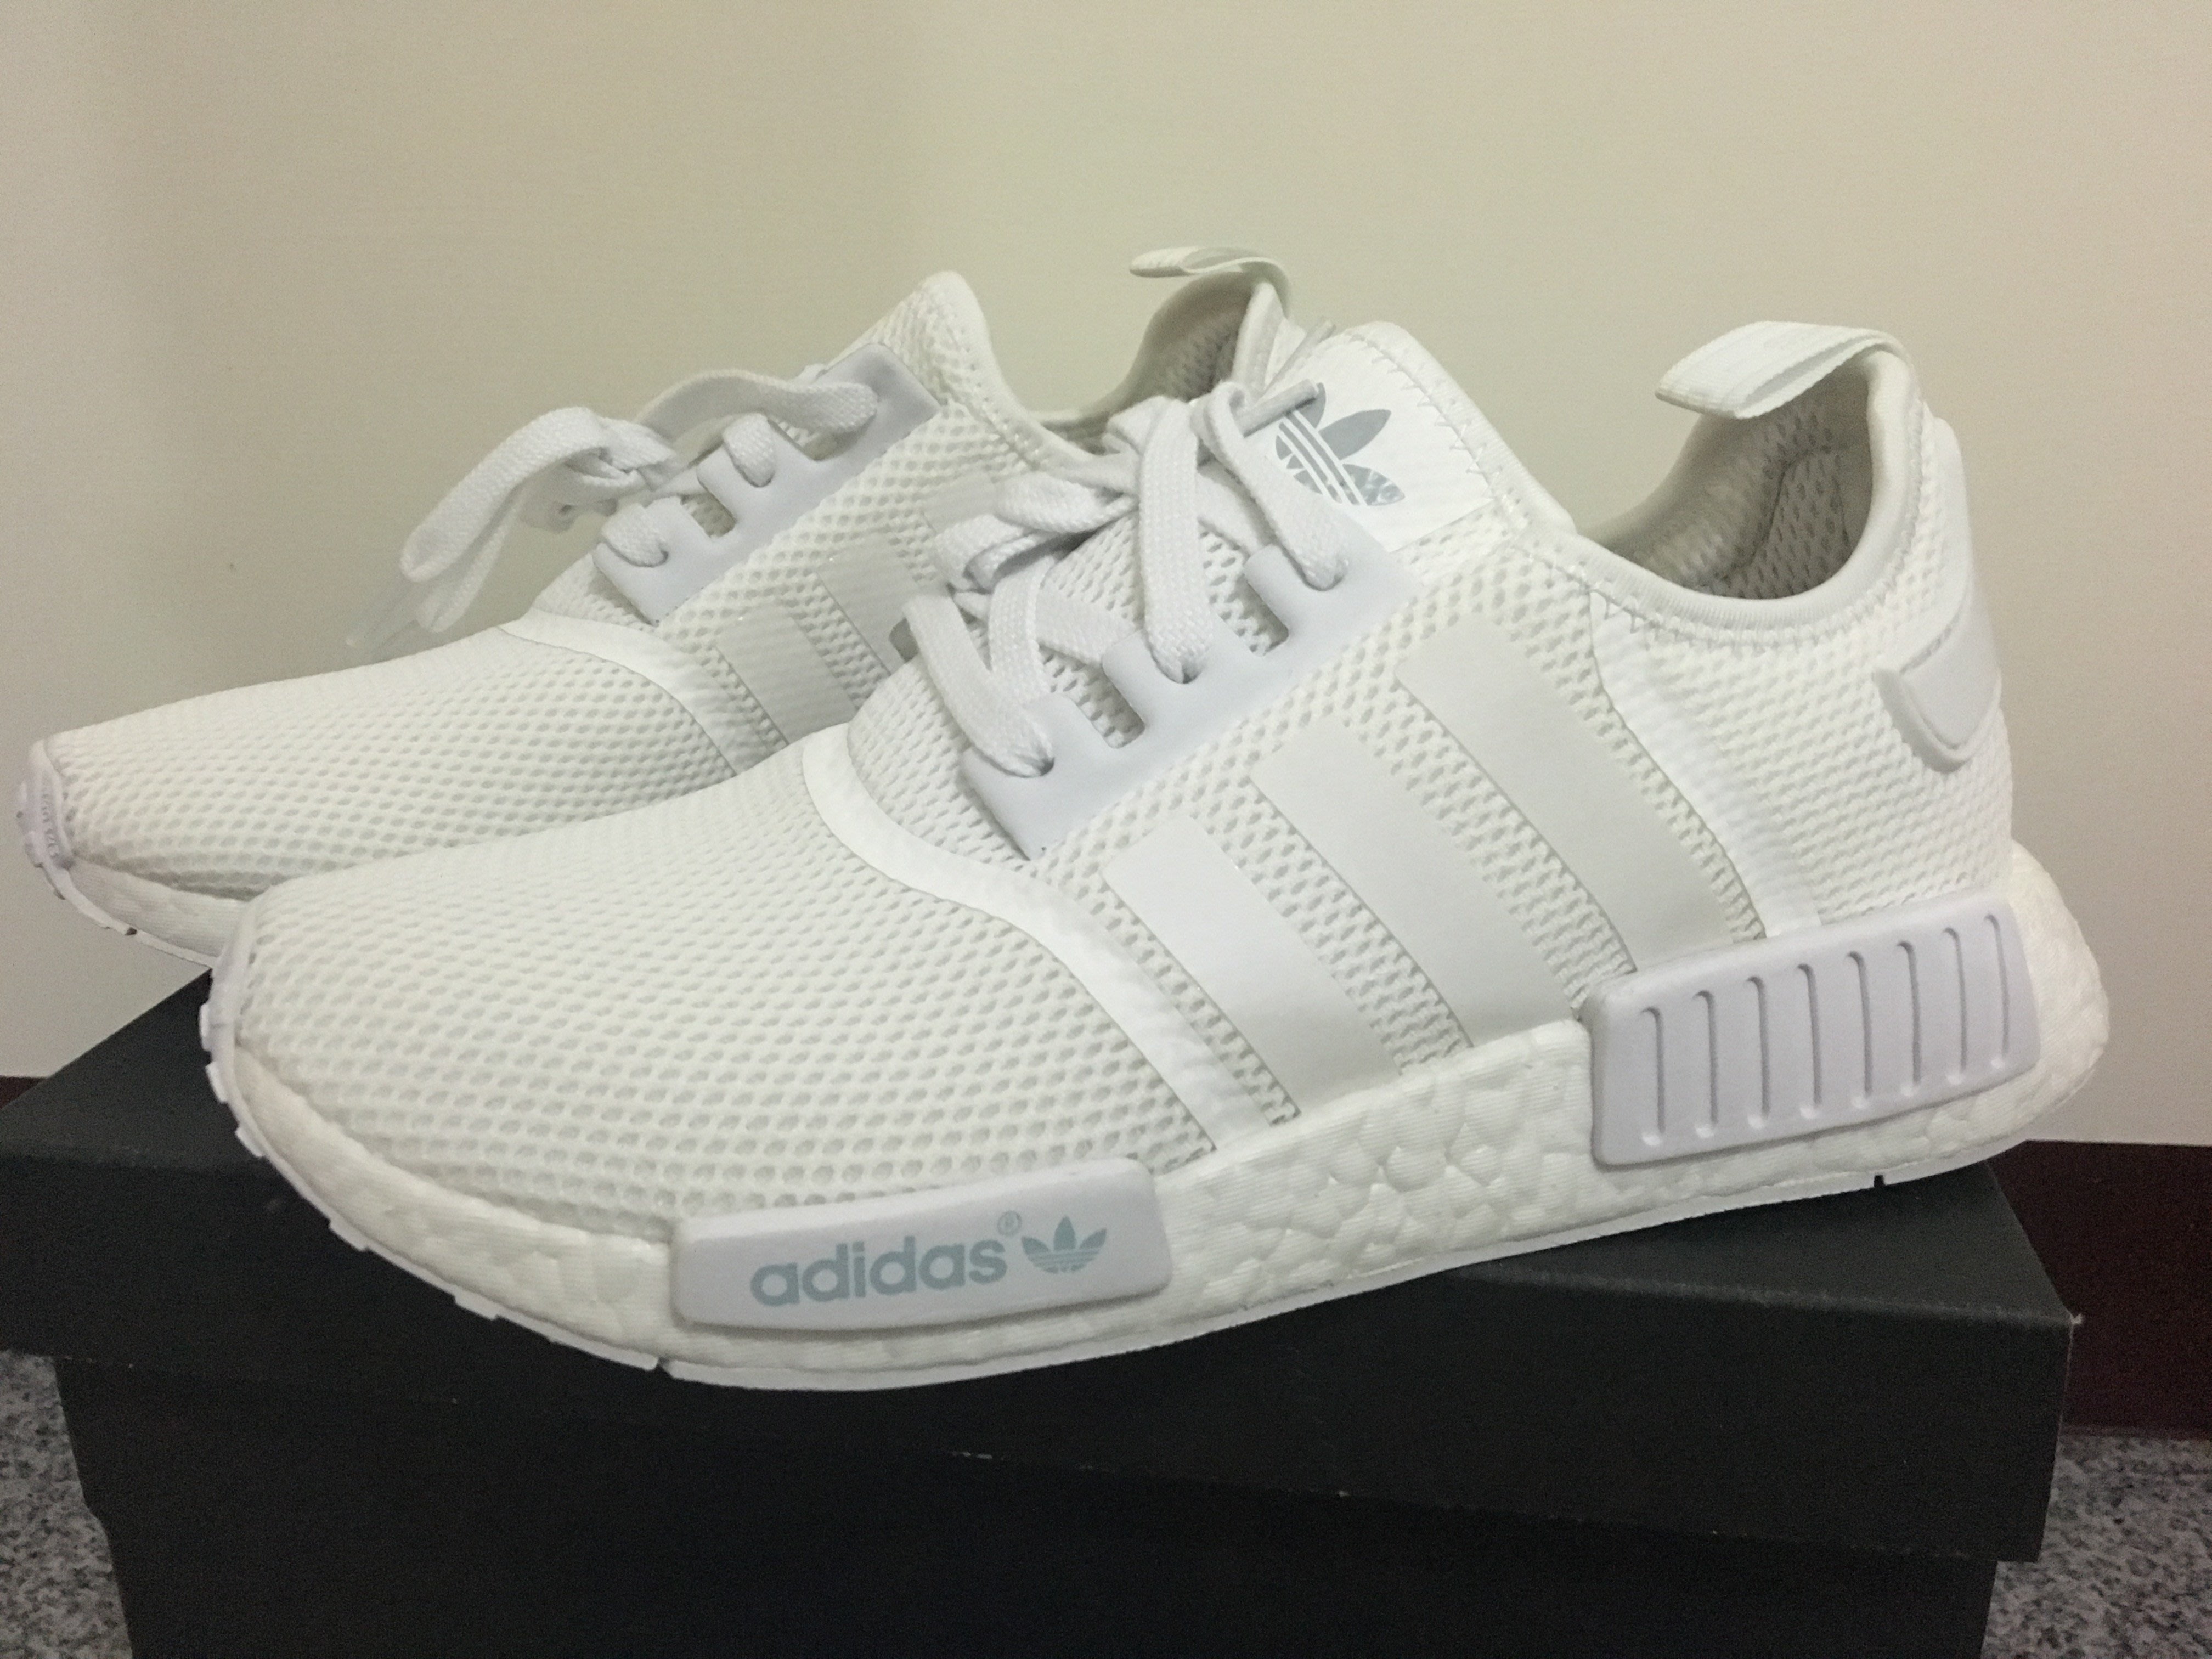 adidas nmd all white